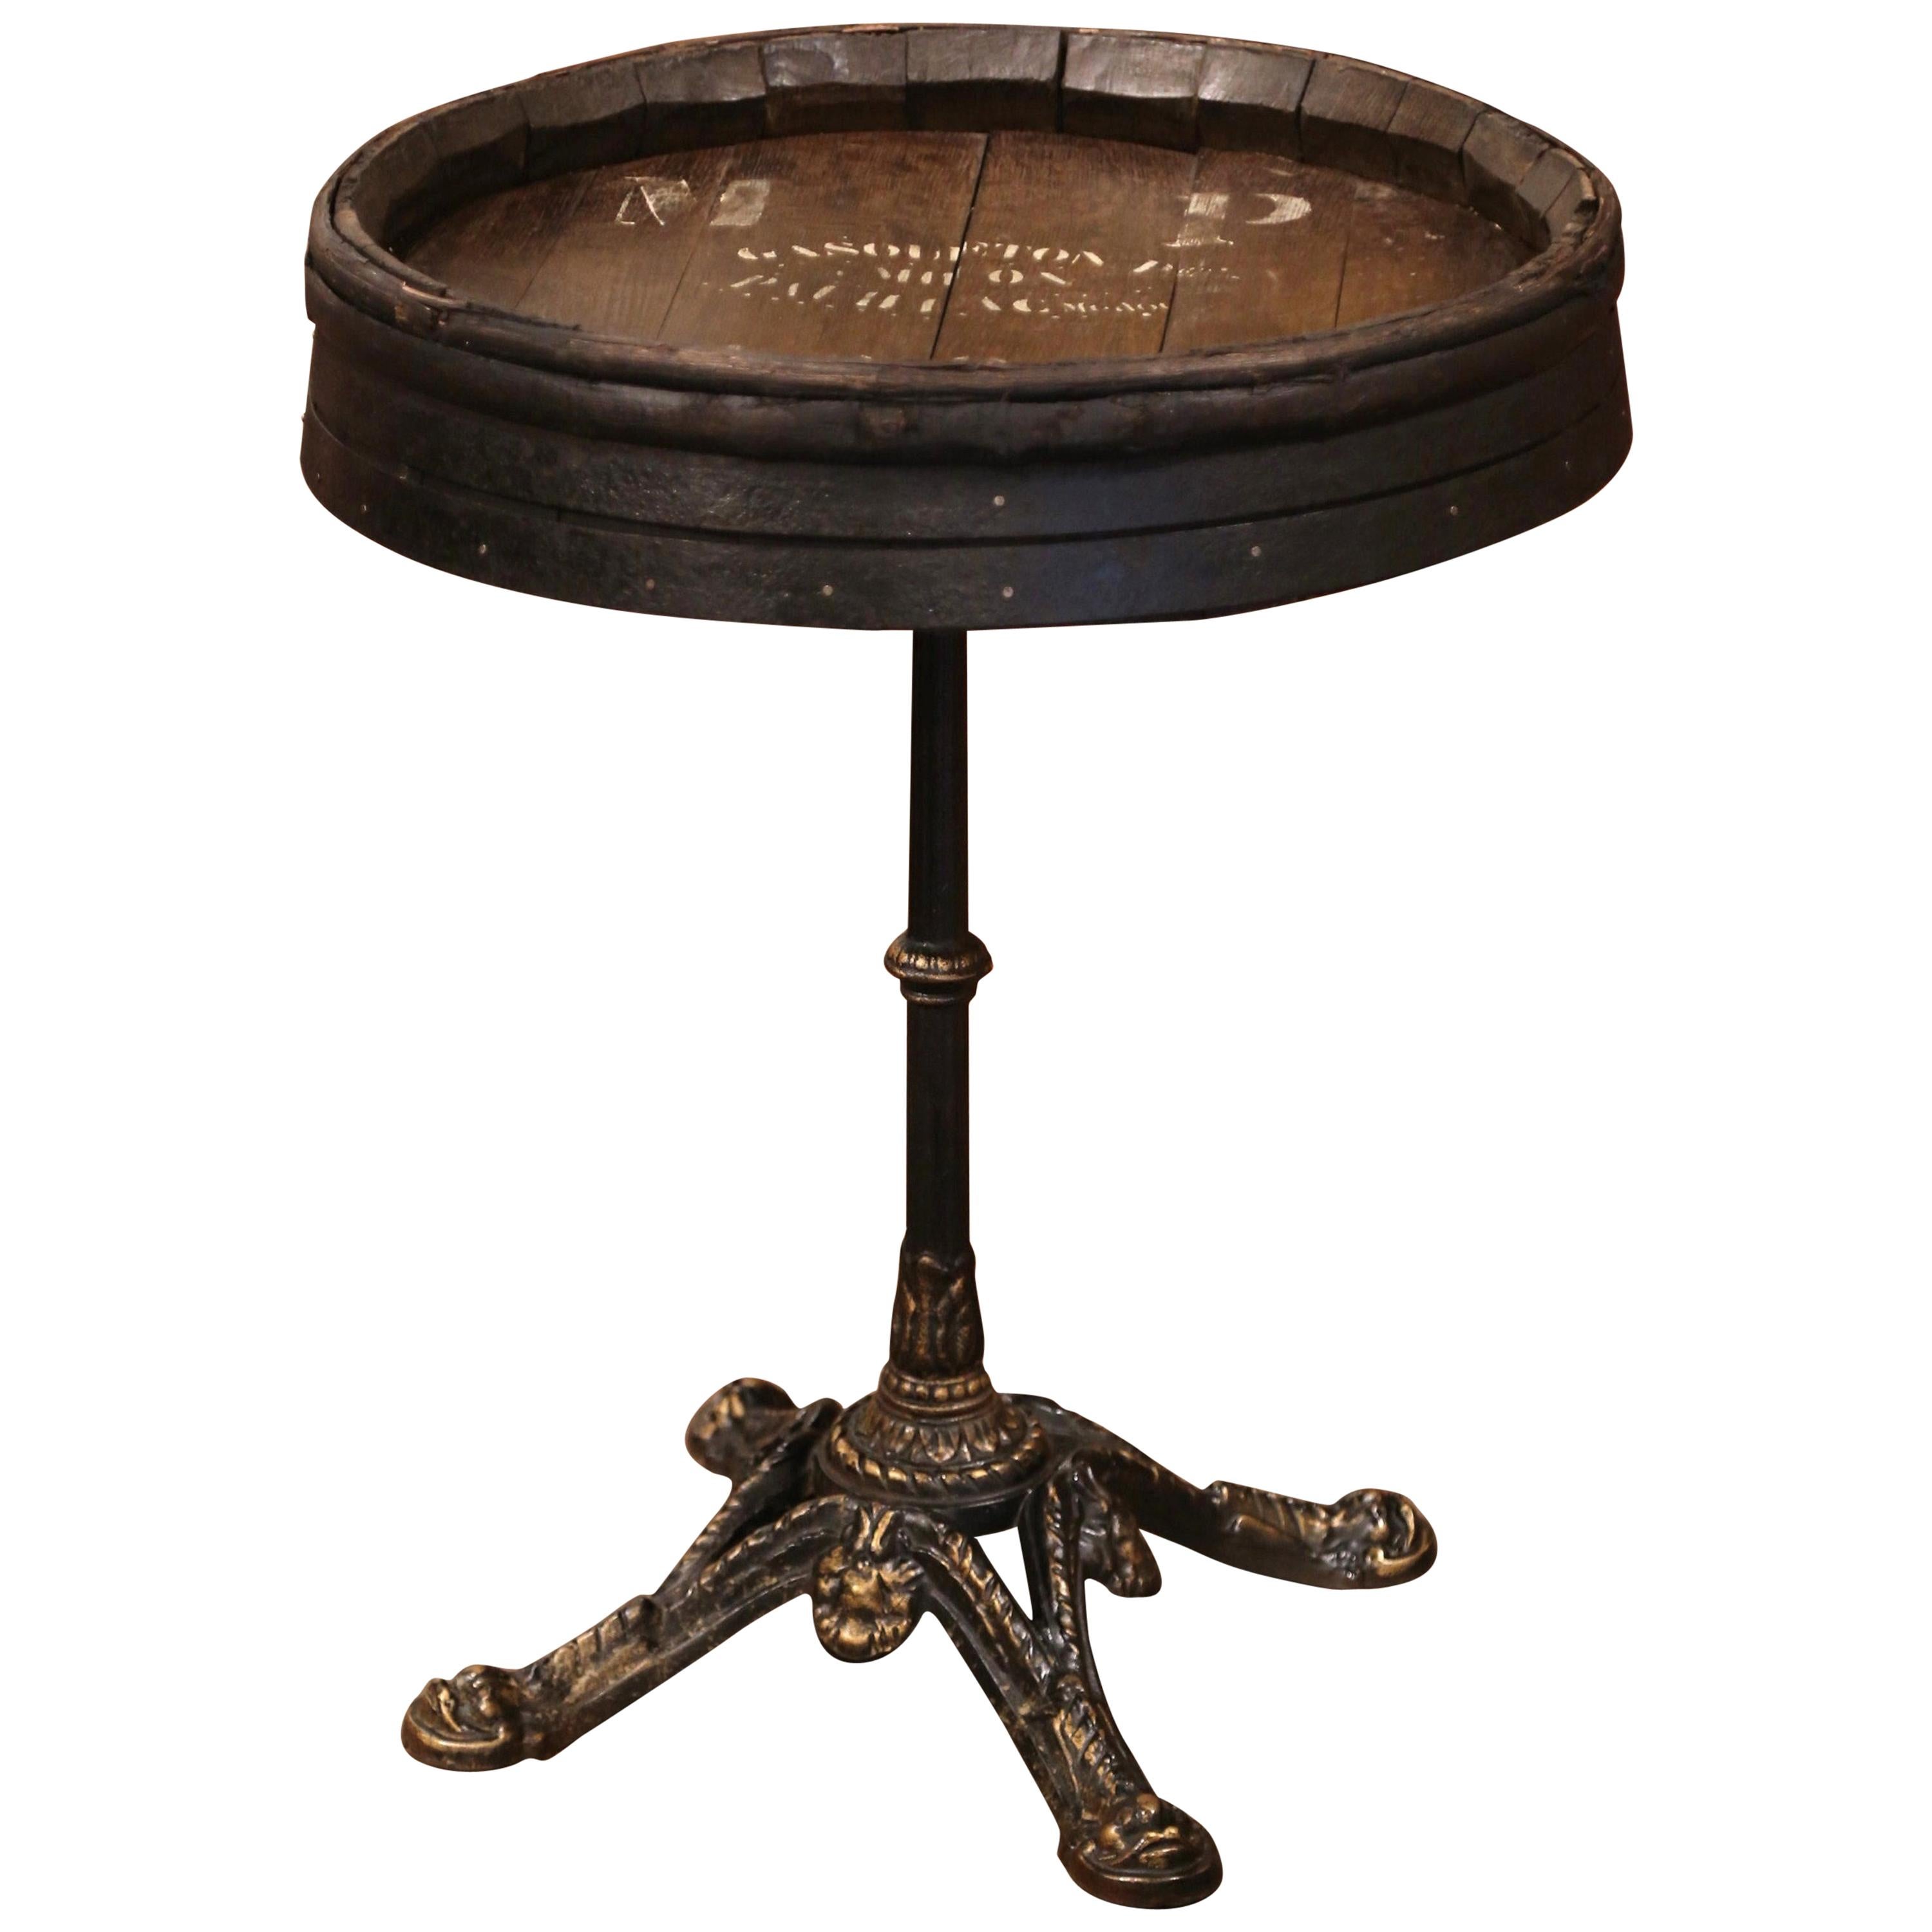 Early 20th Century French Iron Pedestal Table with Oak Wine Barrel Top